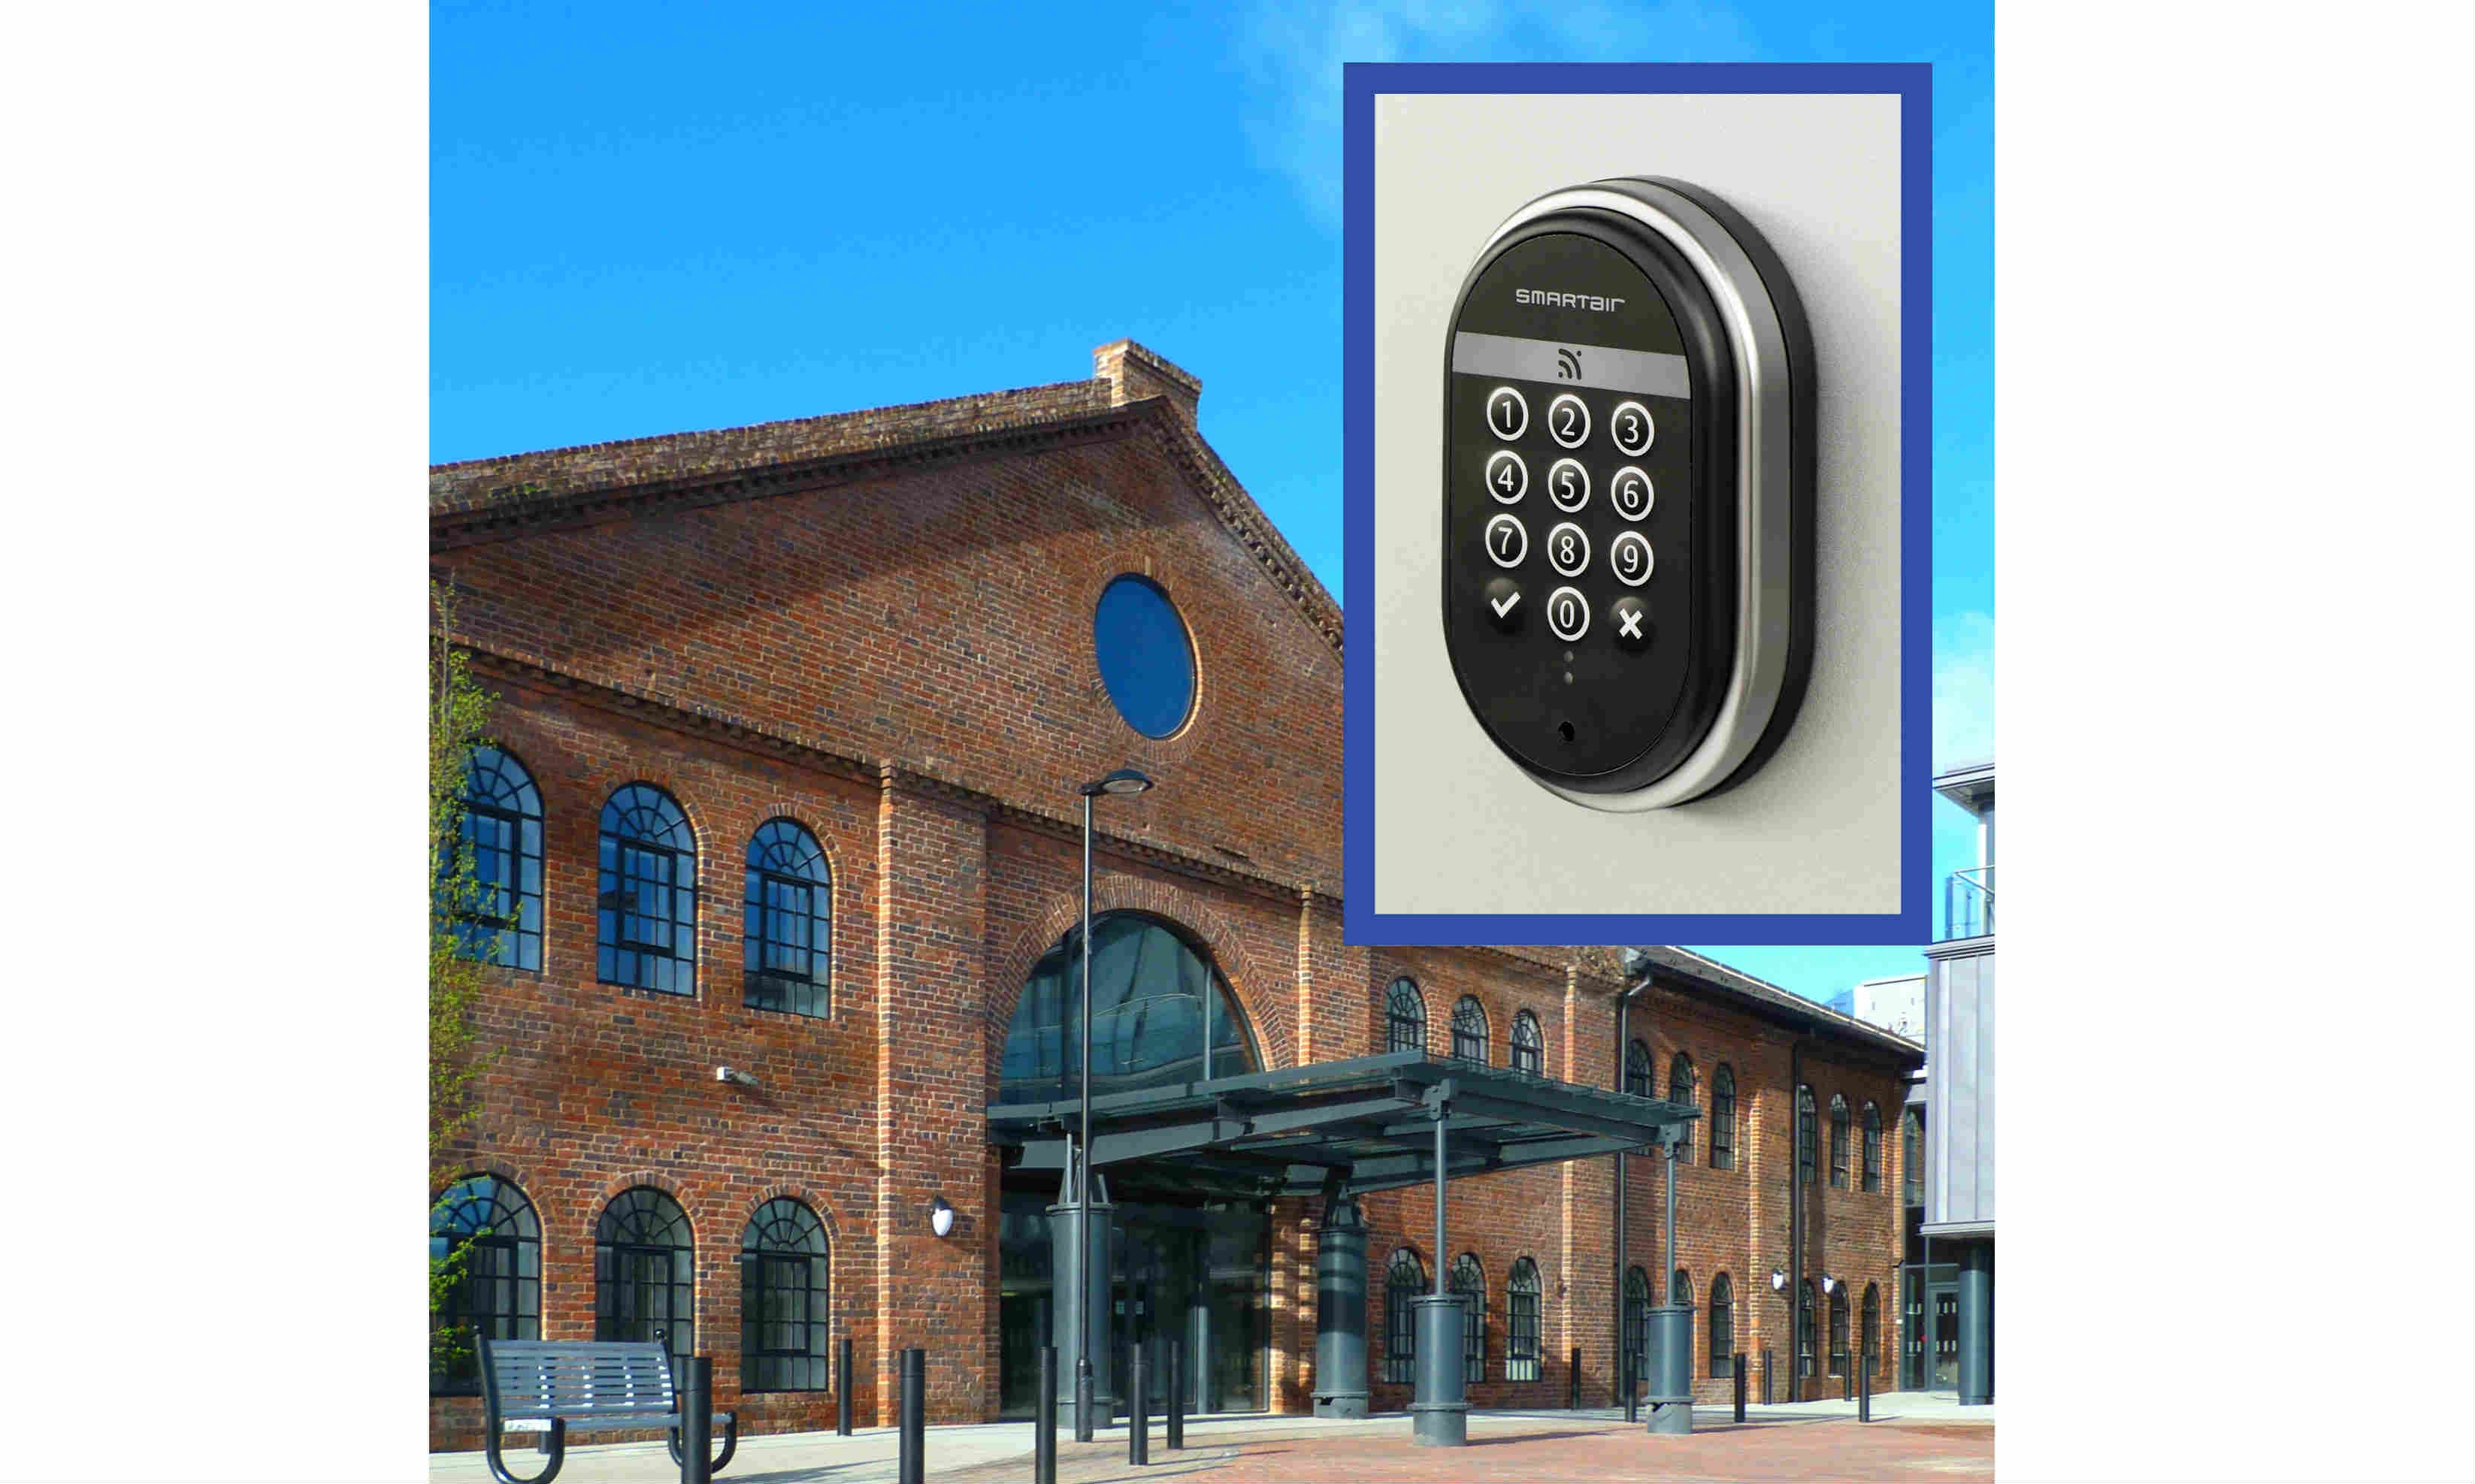 Making the change from historic building to state-of-the-art medical centre, with SMARTair™ wireless access control